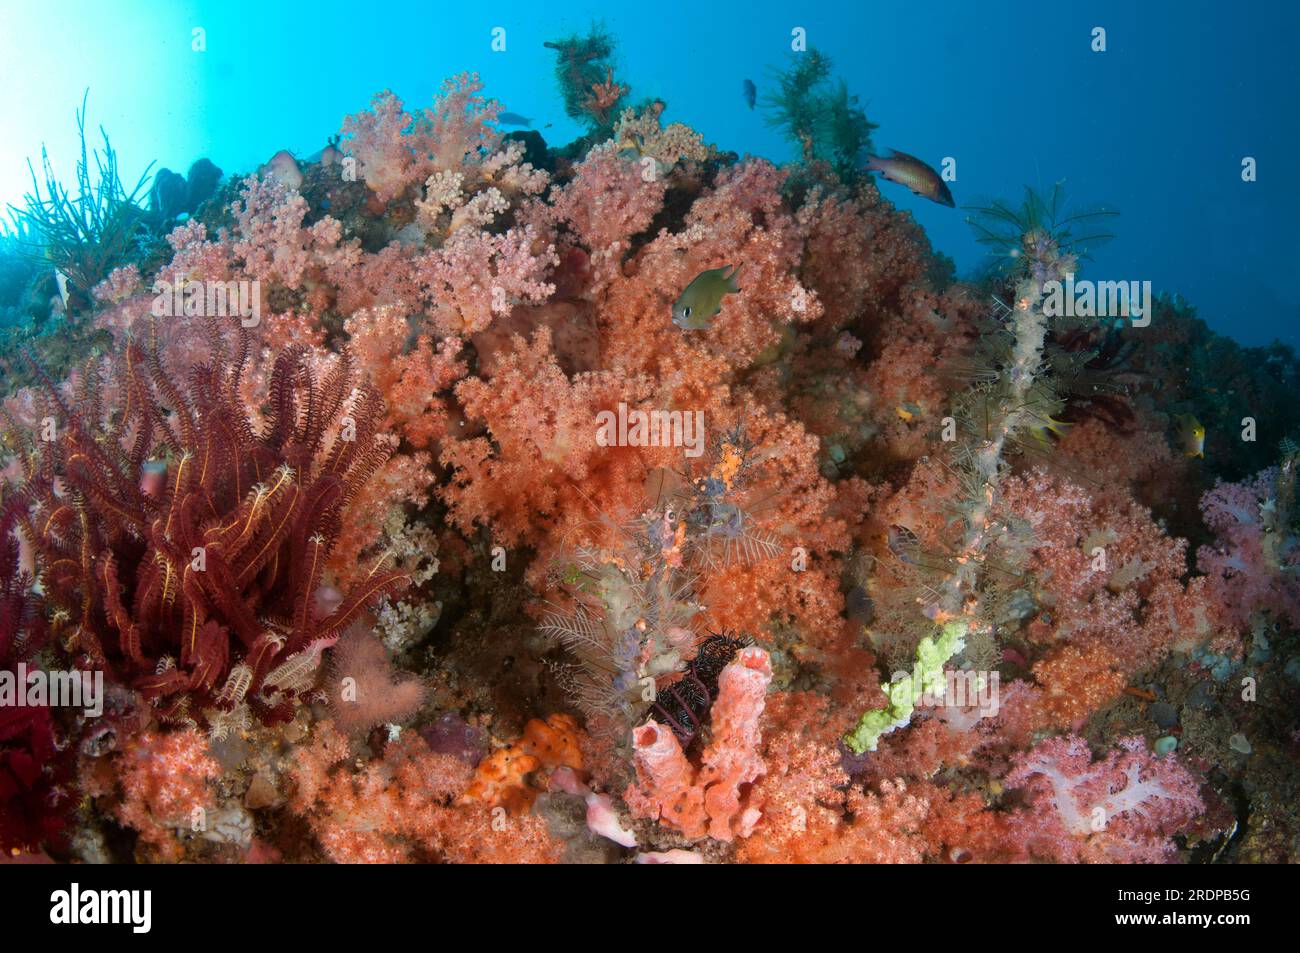 Wall with Divaricate Tree Coral, Spongodes sp, with sun in background, Angel's Window dive site, Lembeh Straits, Sulawesi, Indonesia Stock Photo